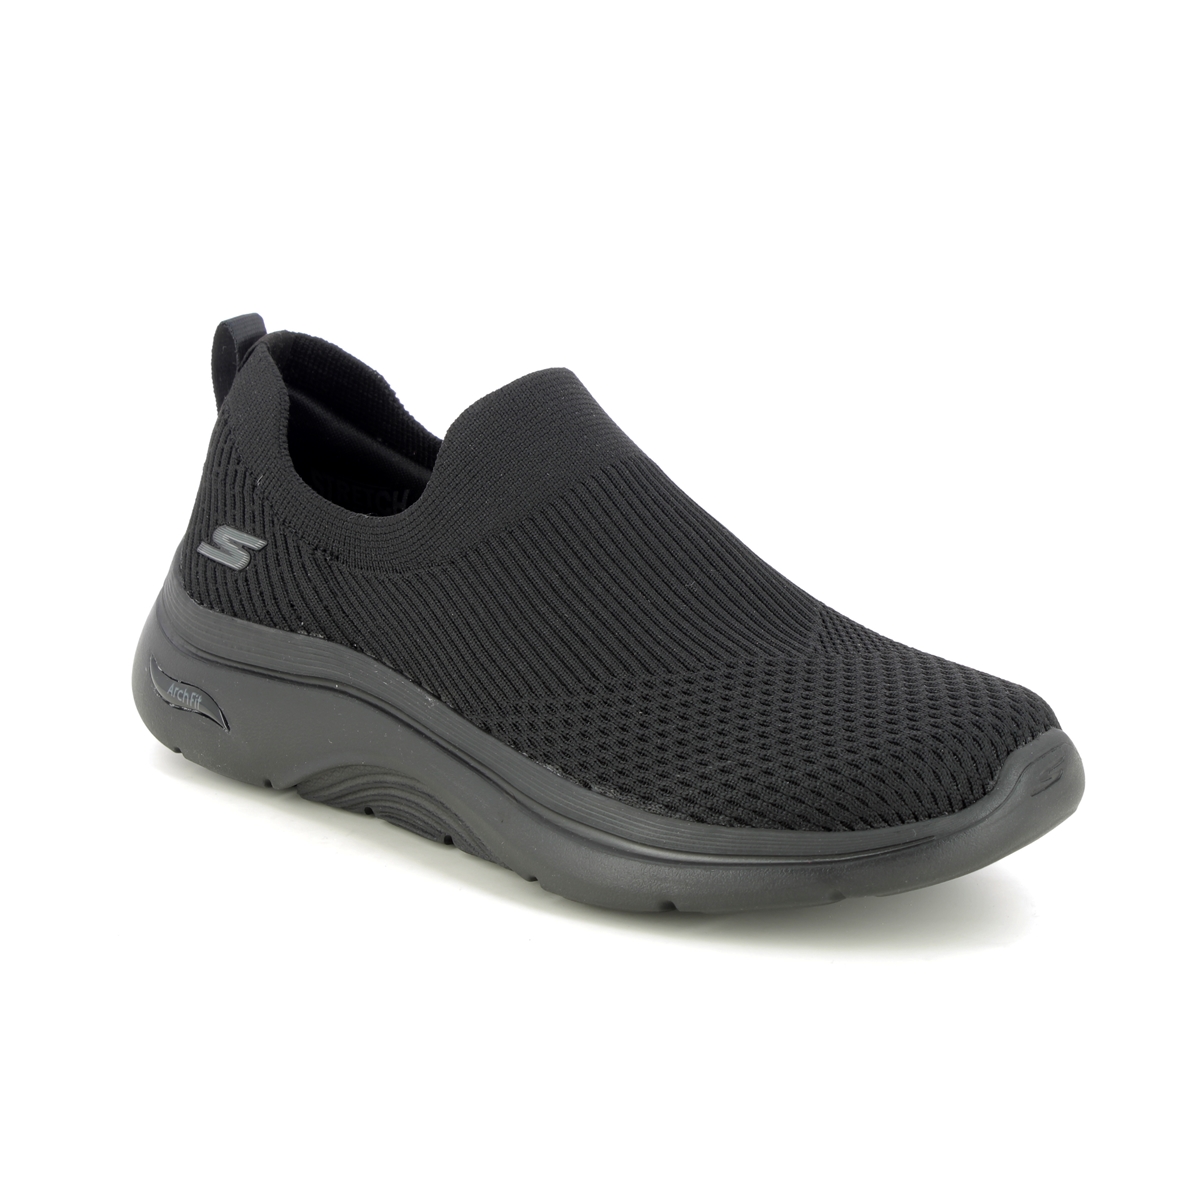 Skechers Arch Fit 2 Slip BBK Black Womens trainers 125300 in a Plain Textile in Size 6